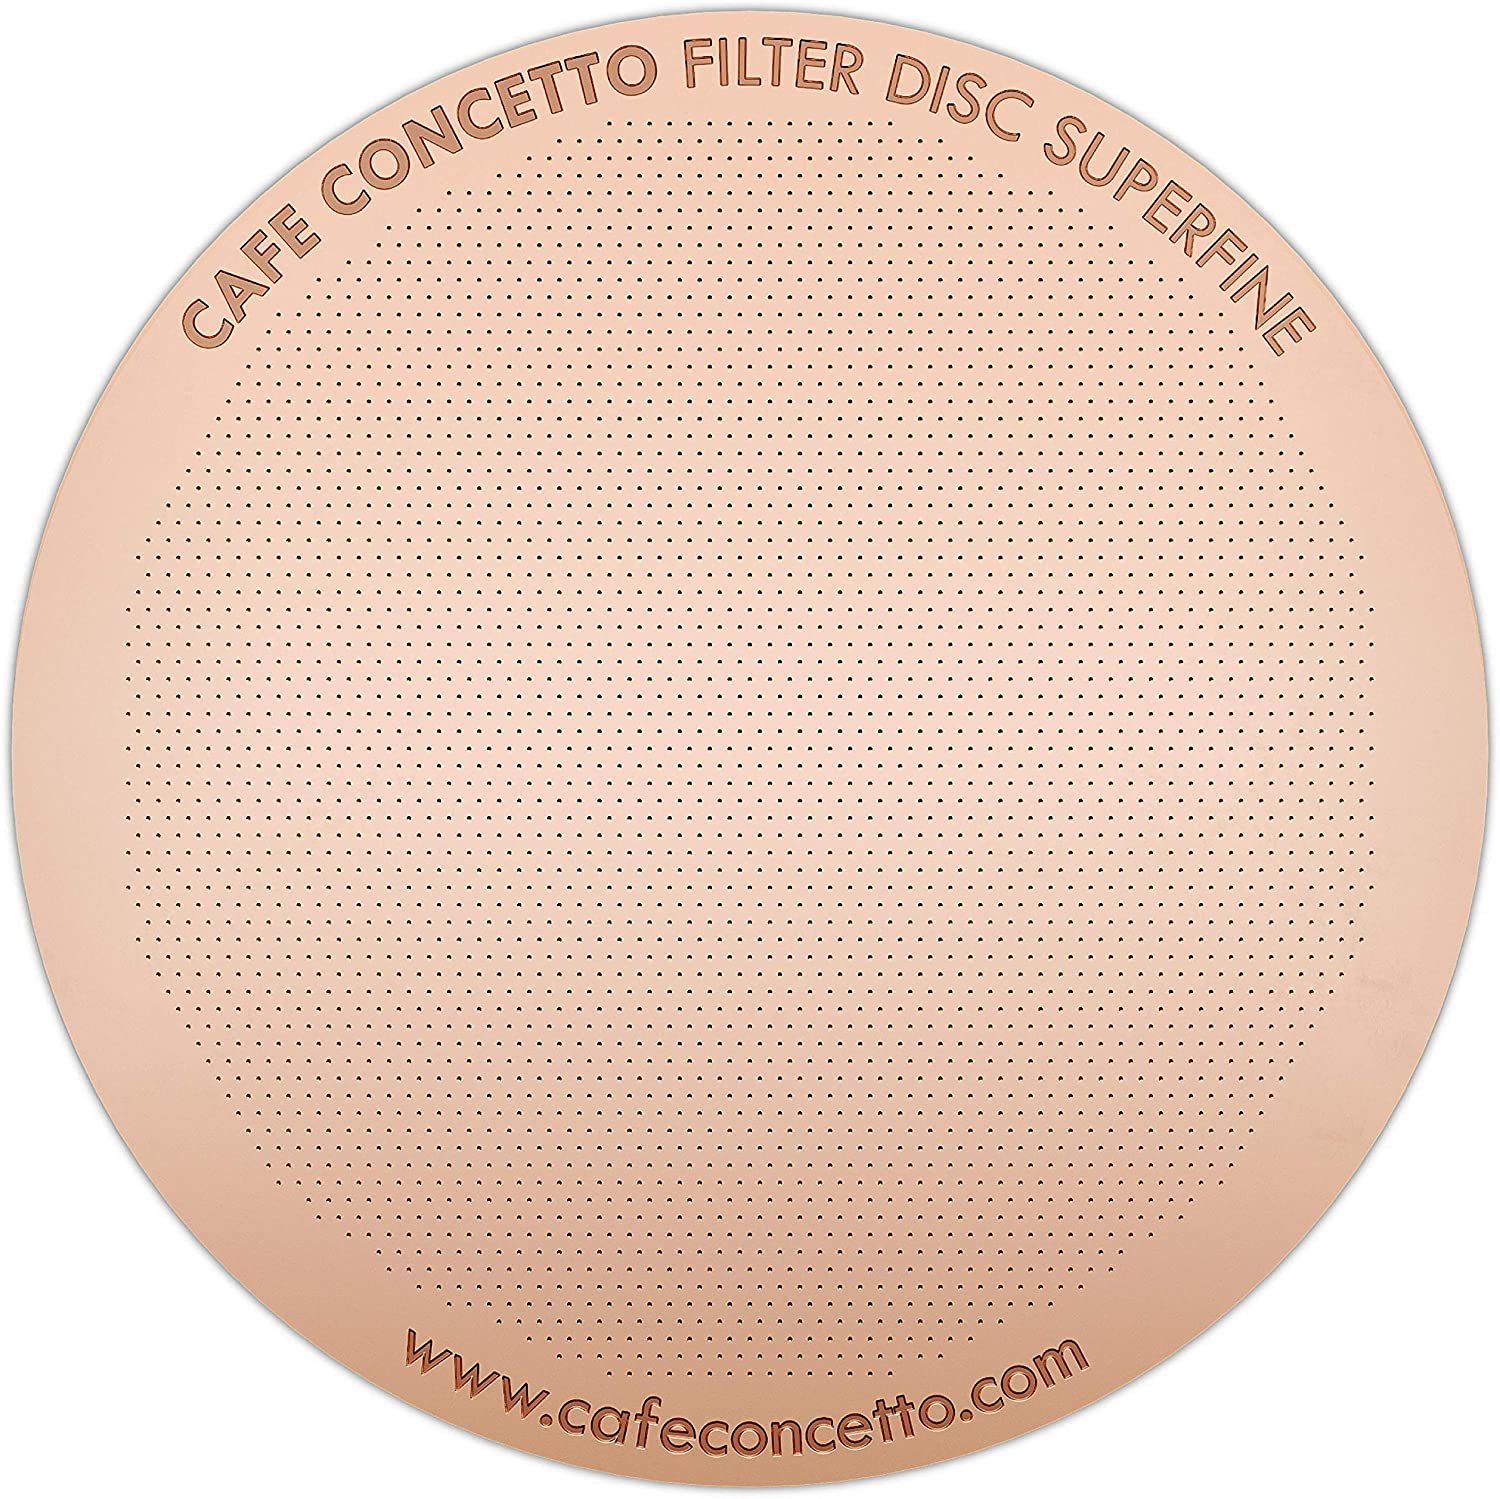 cafeconcetto metal filter superfine